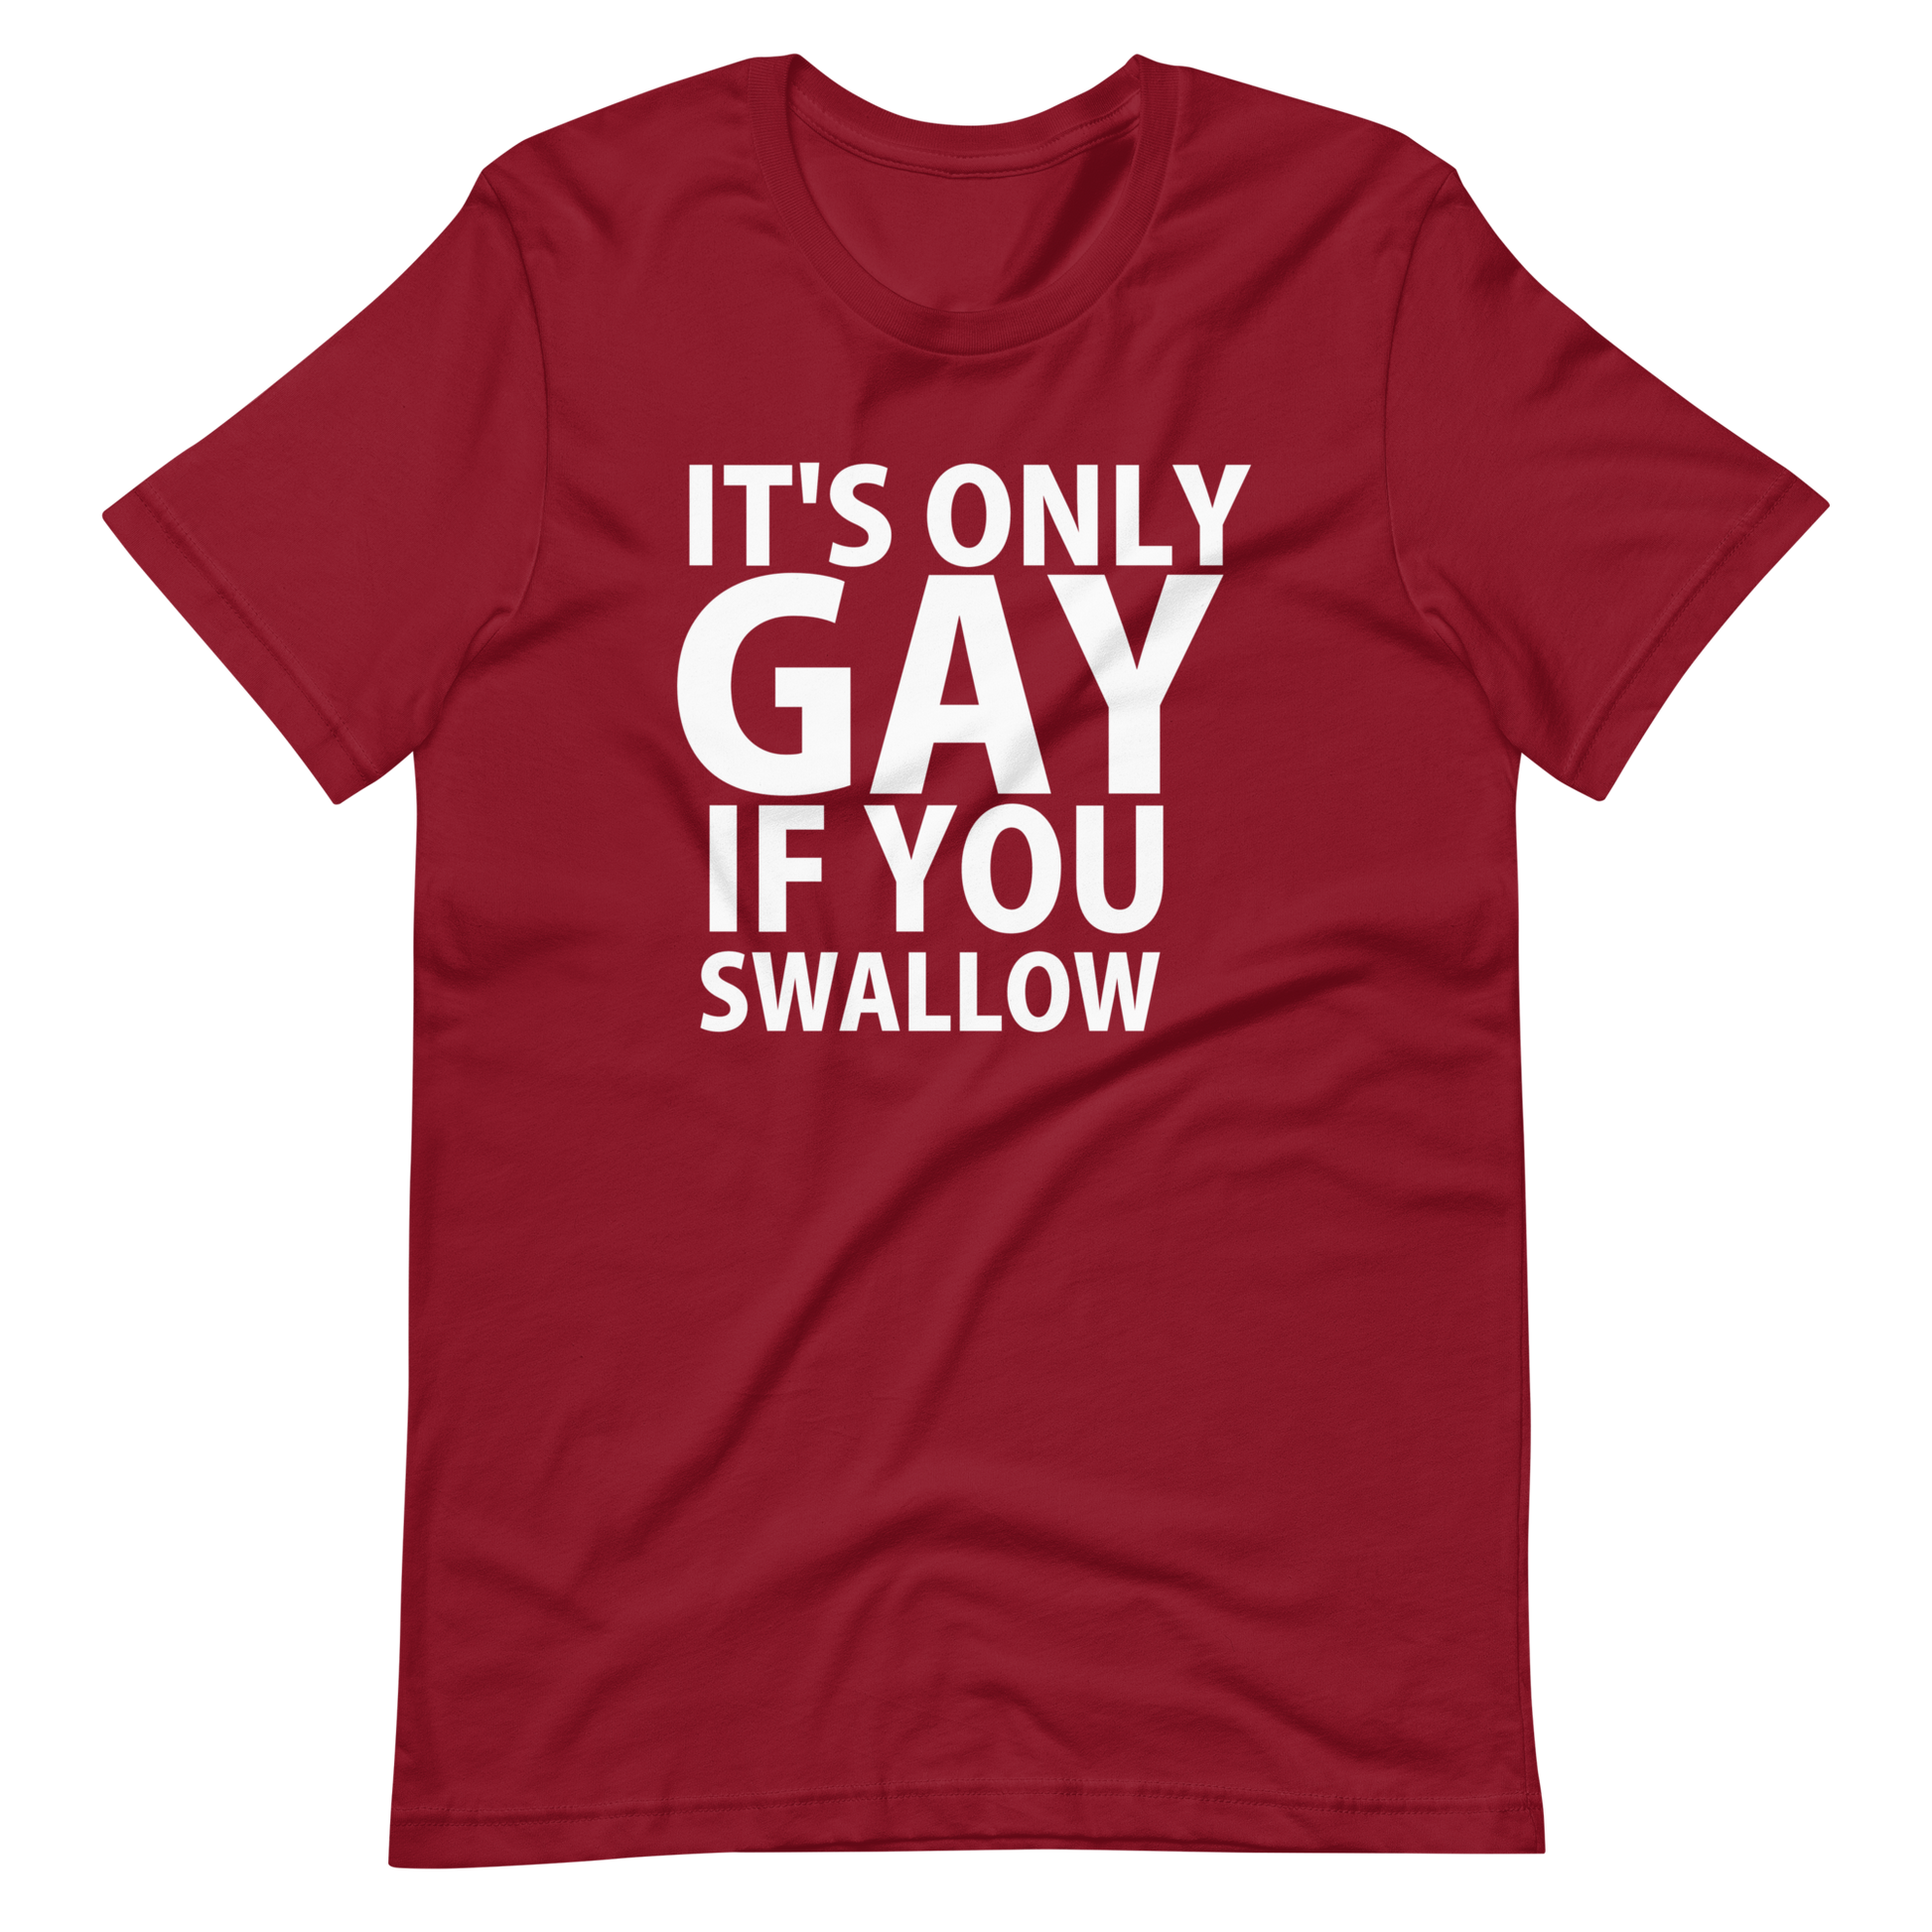 It's Only Gay If You Swallow T-Shirt -  Cardinal